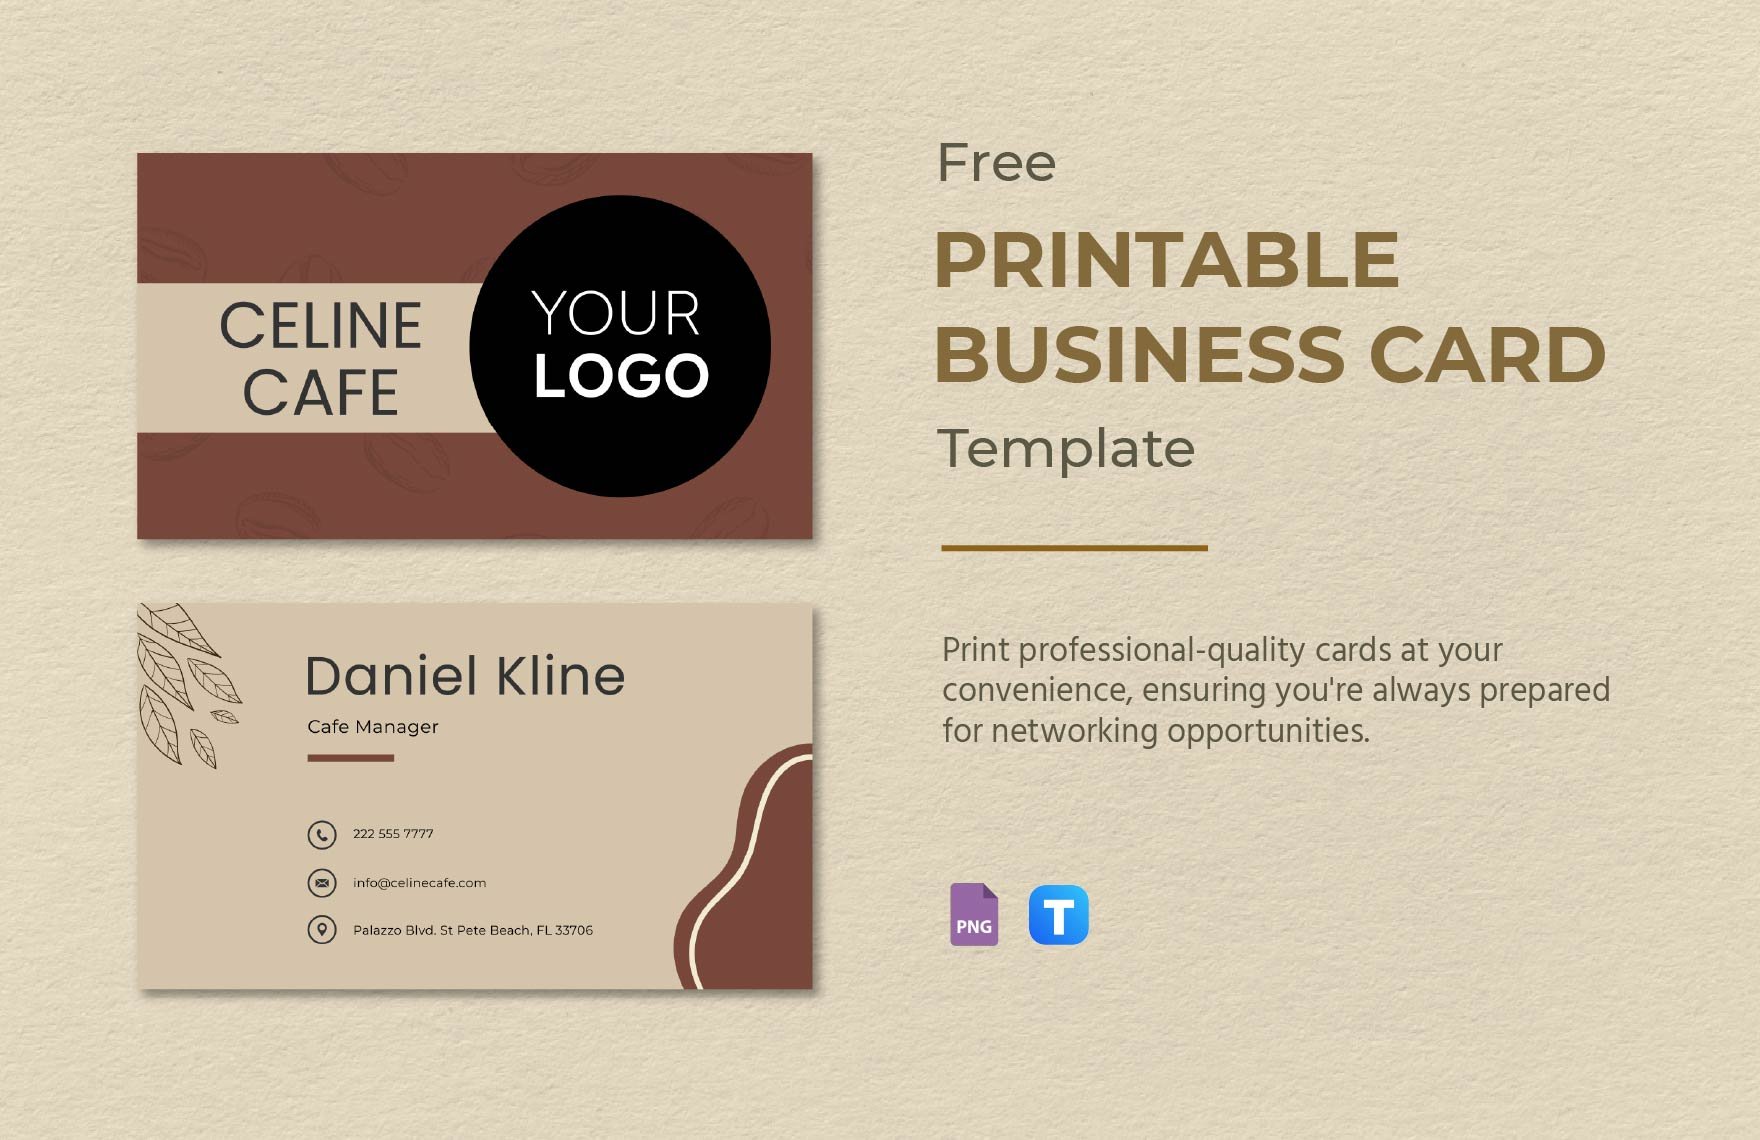 Printable Business Card Template in PNG